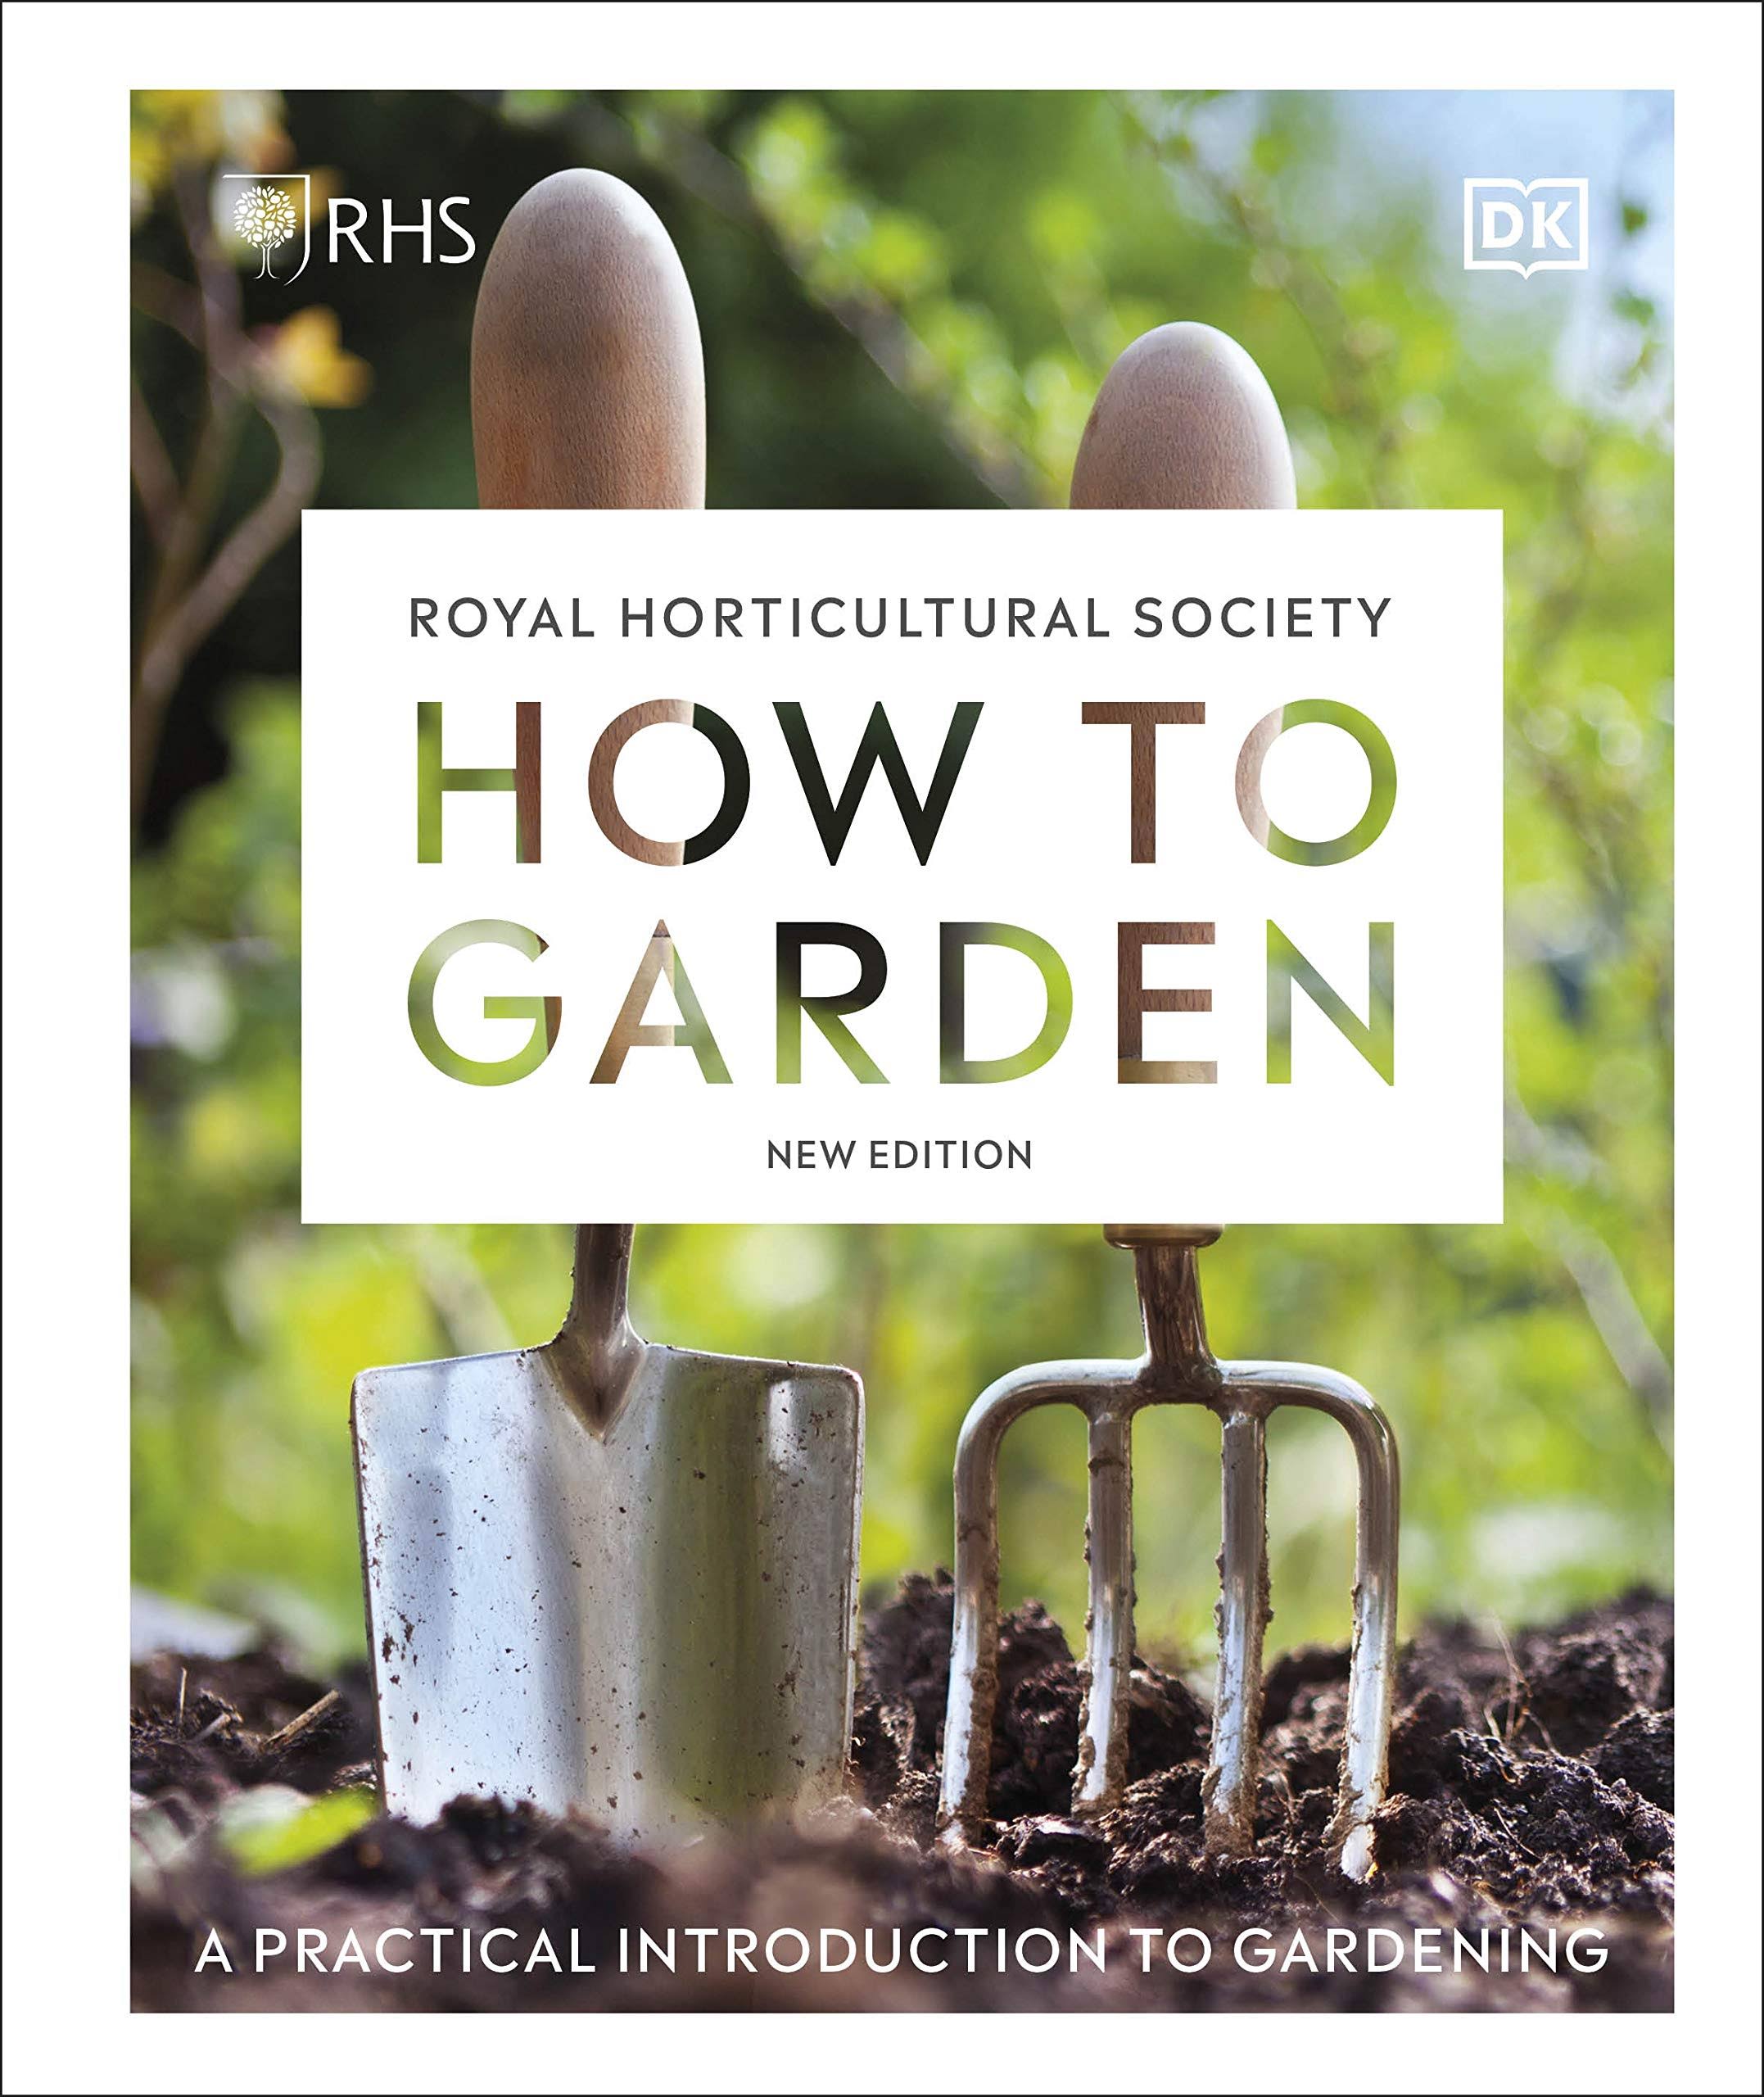 RHS How to Garden New Edition: A Practical Introduction to Gardening [Book]